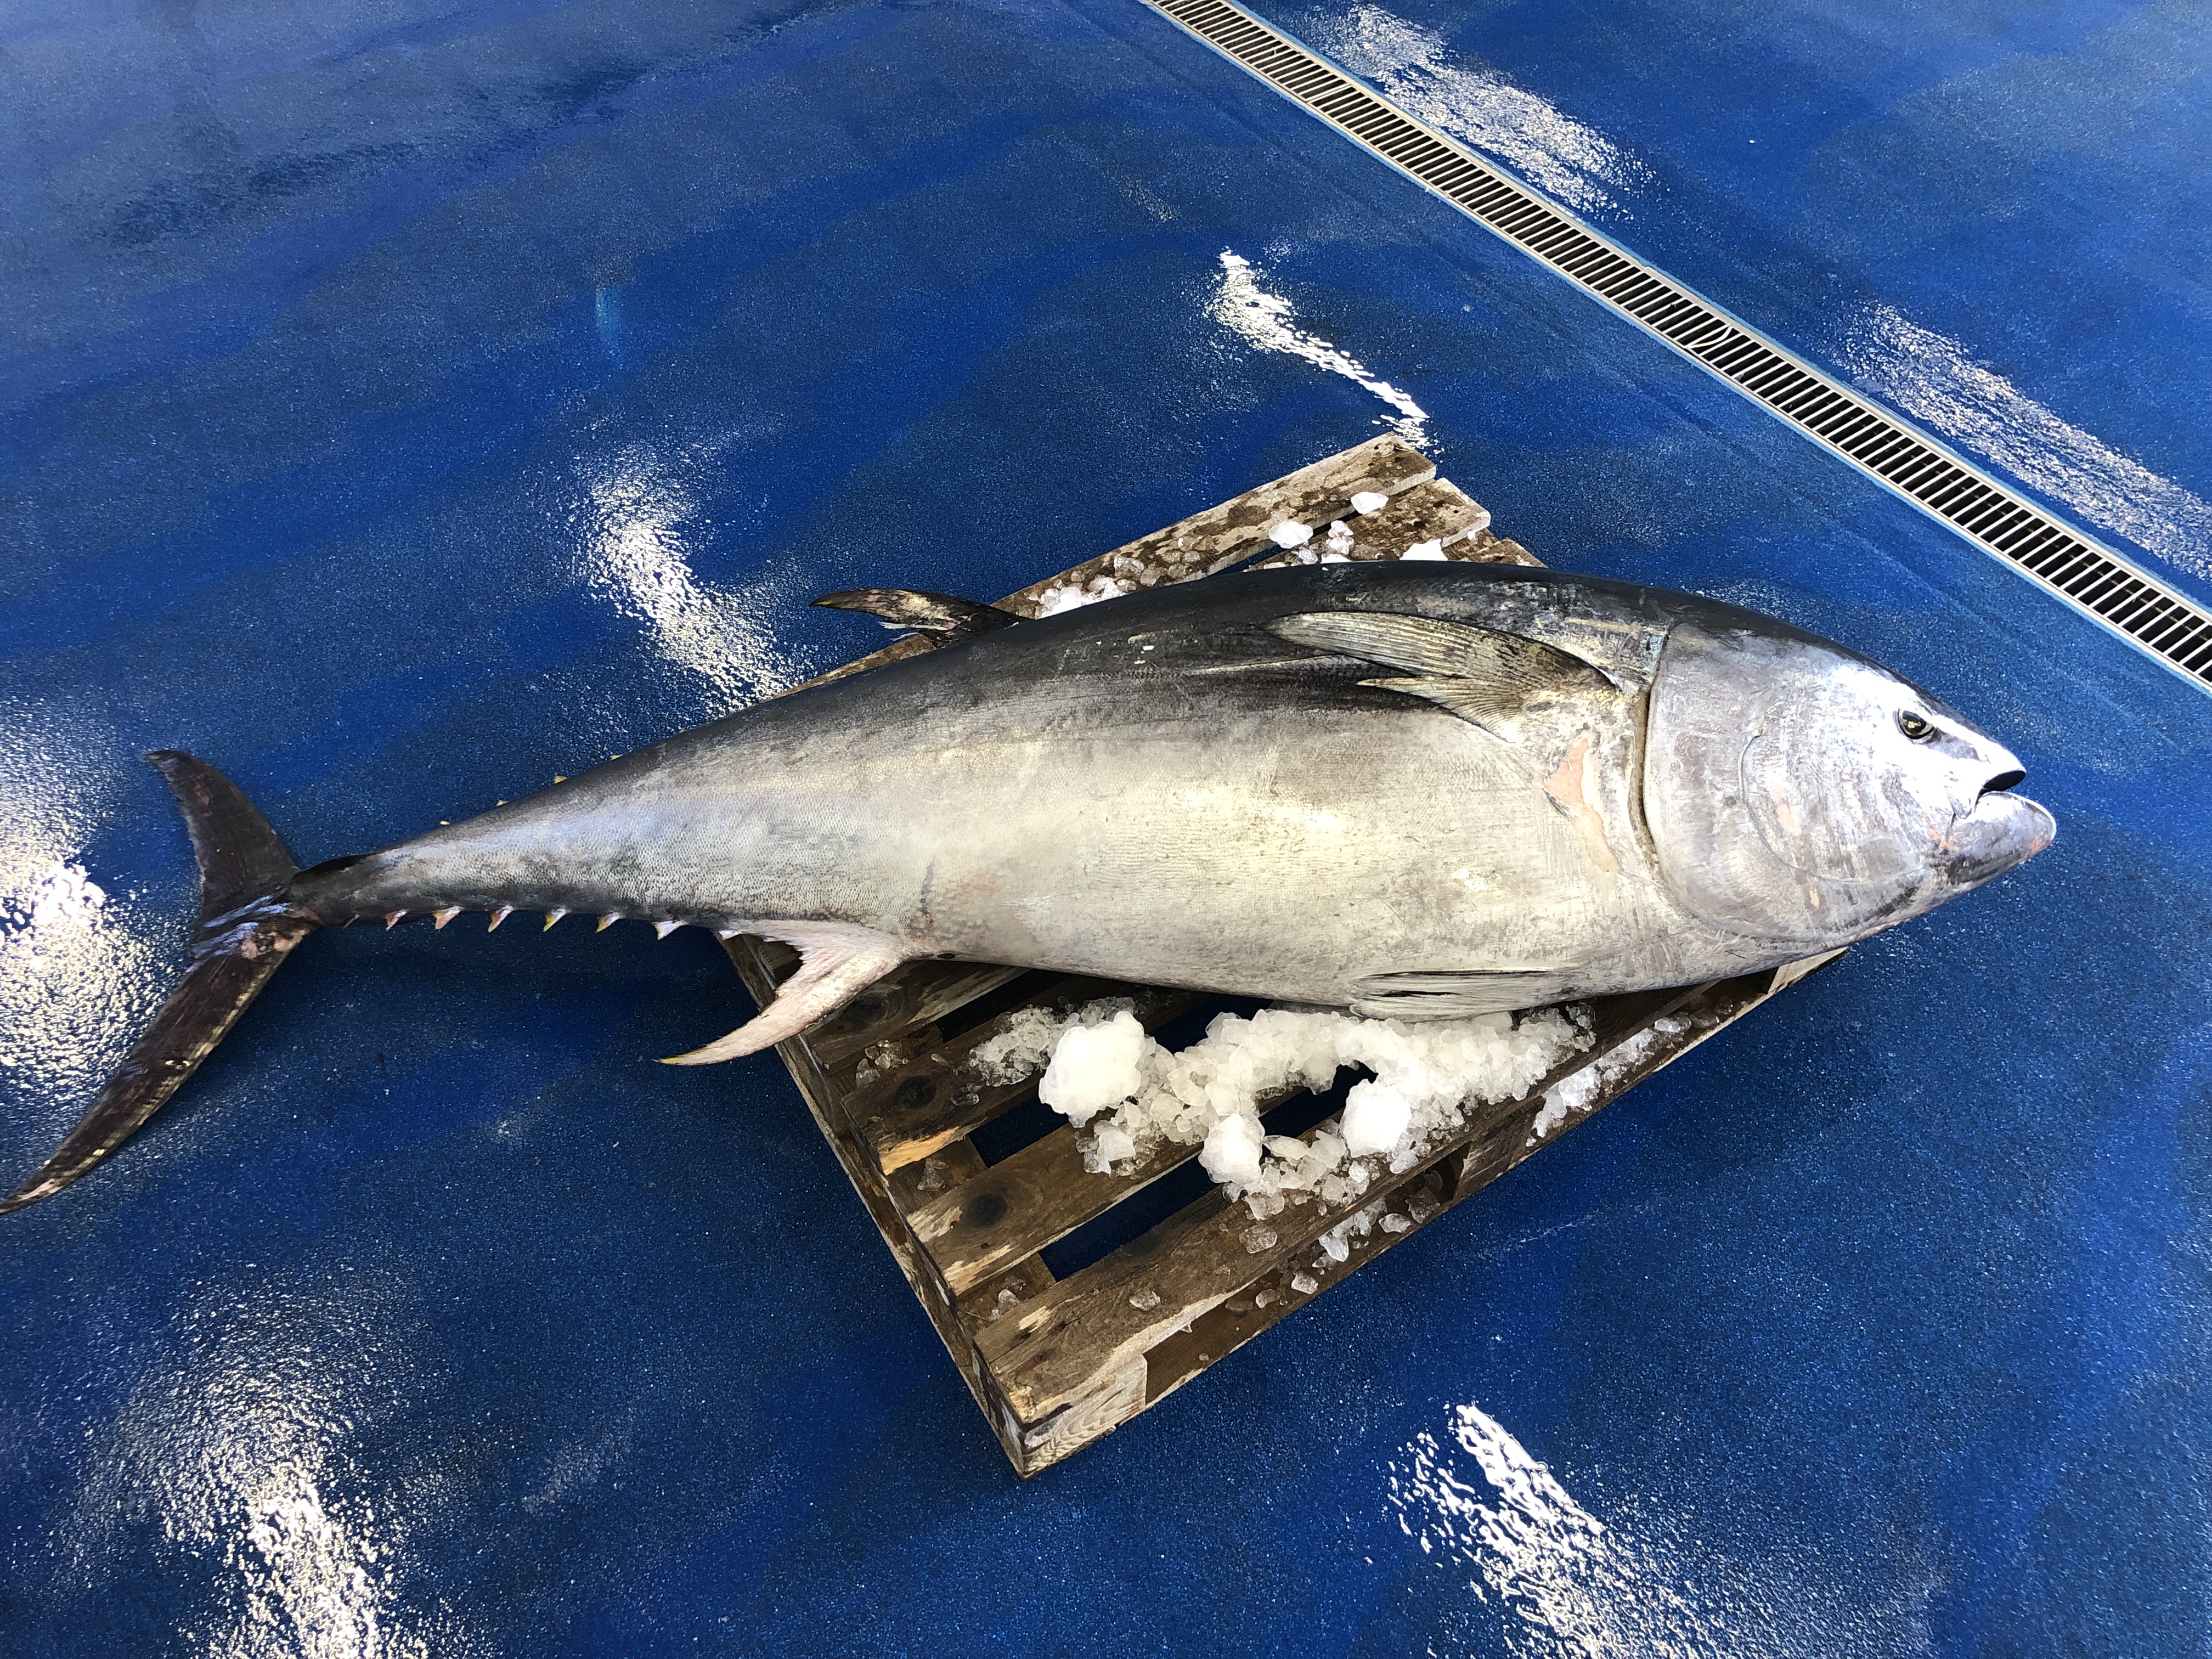 200kg Atlantic bluefin tuna caught in South West waters for first